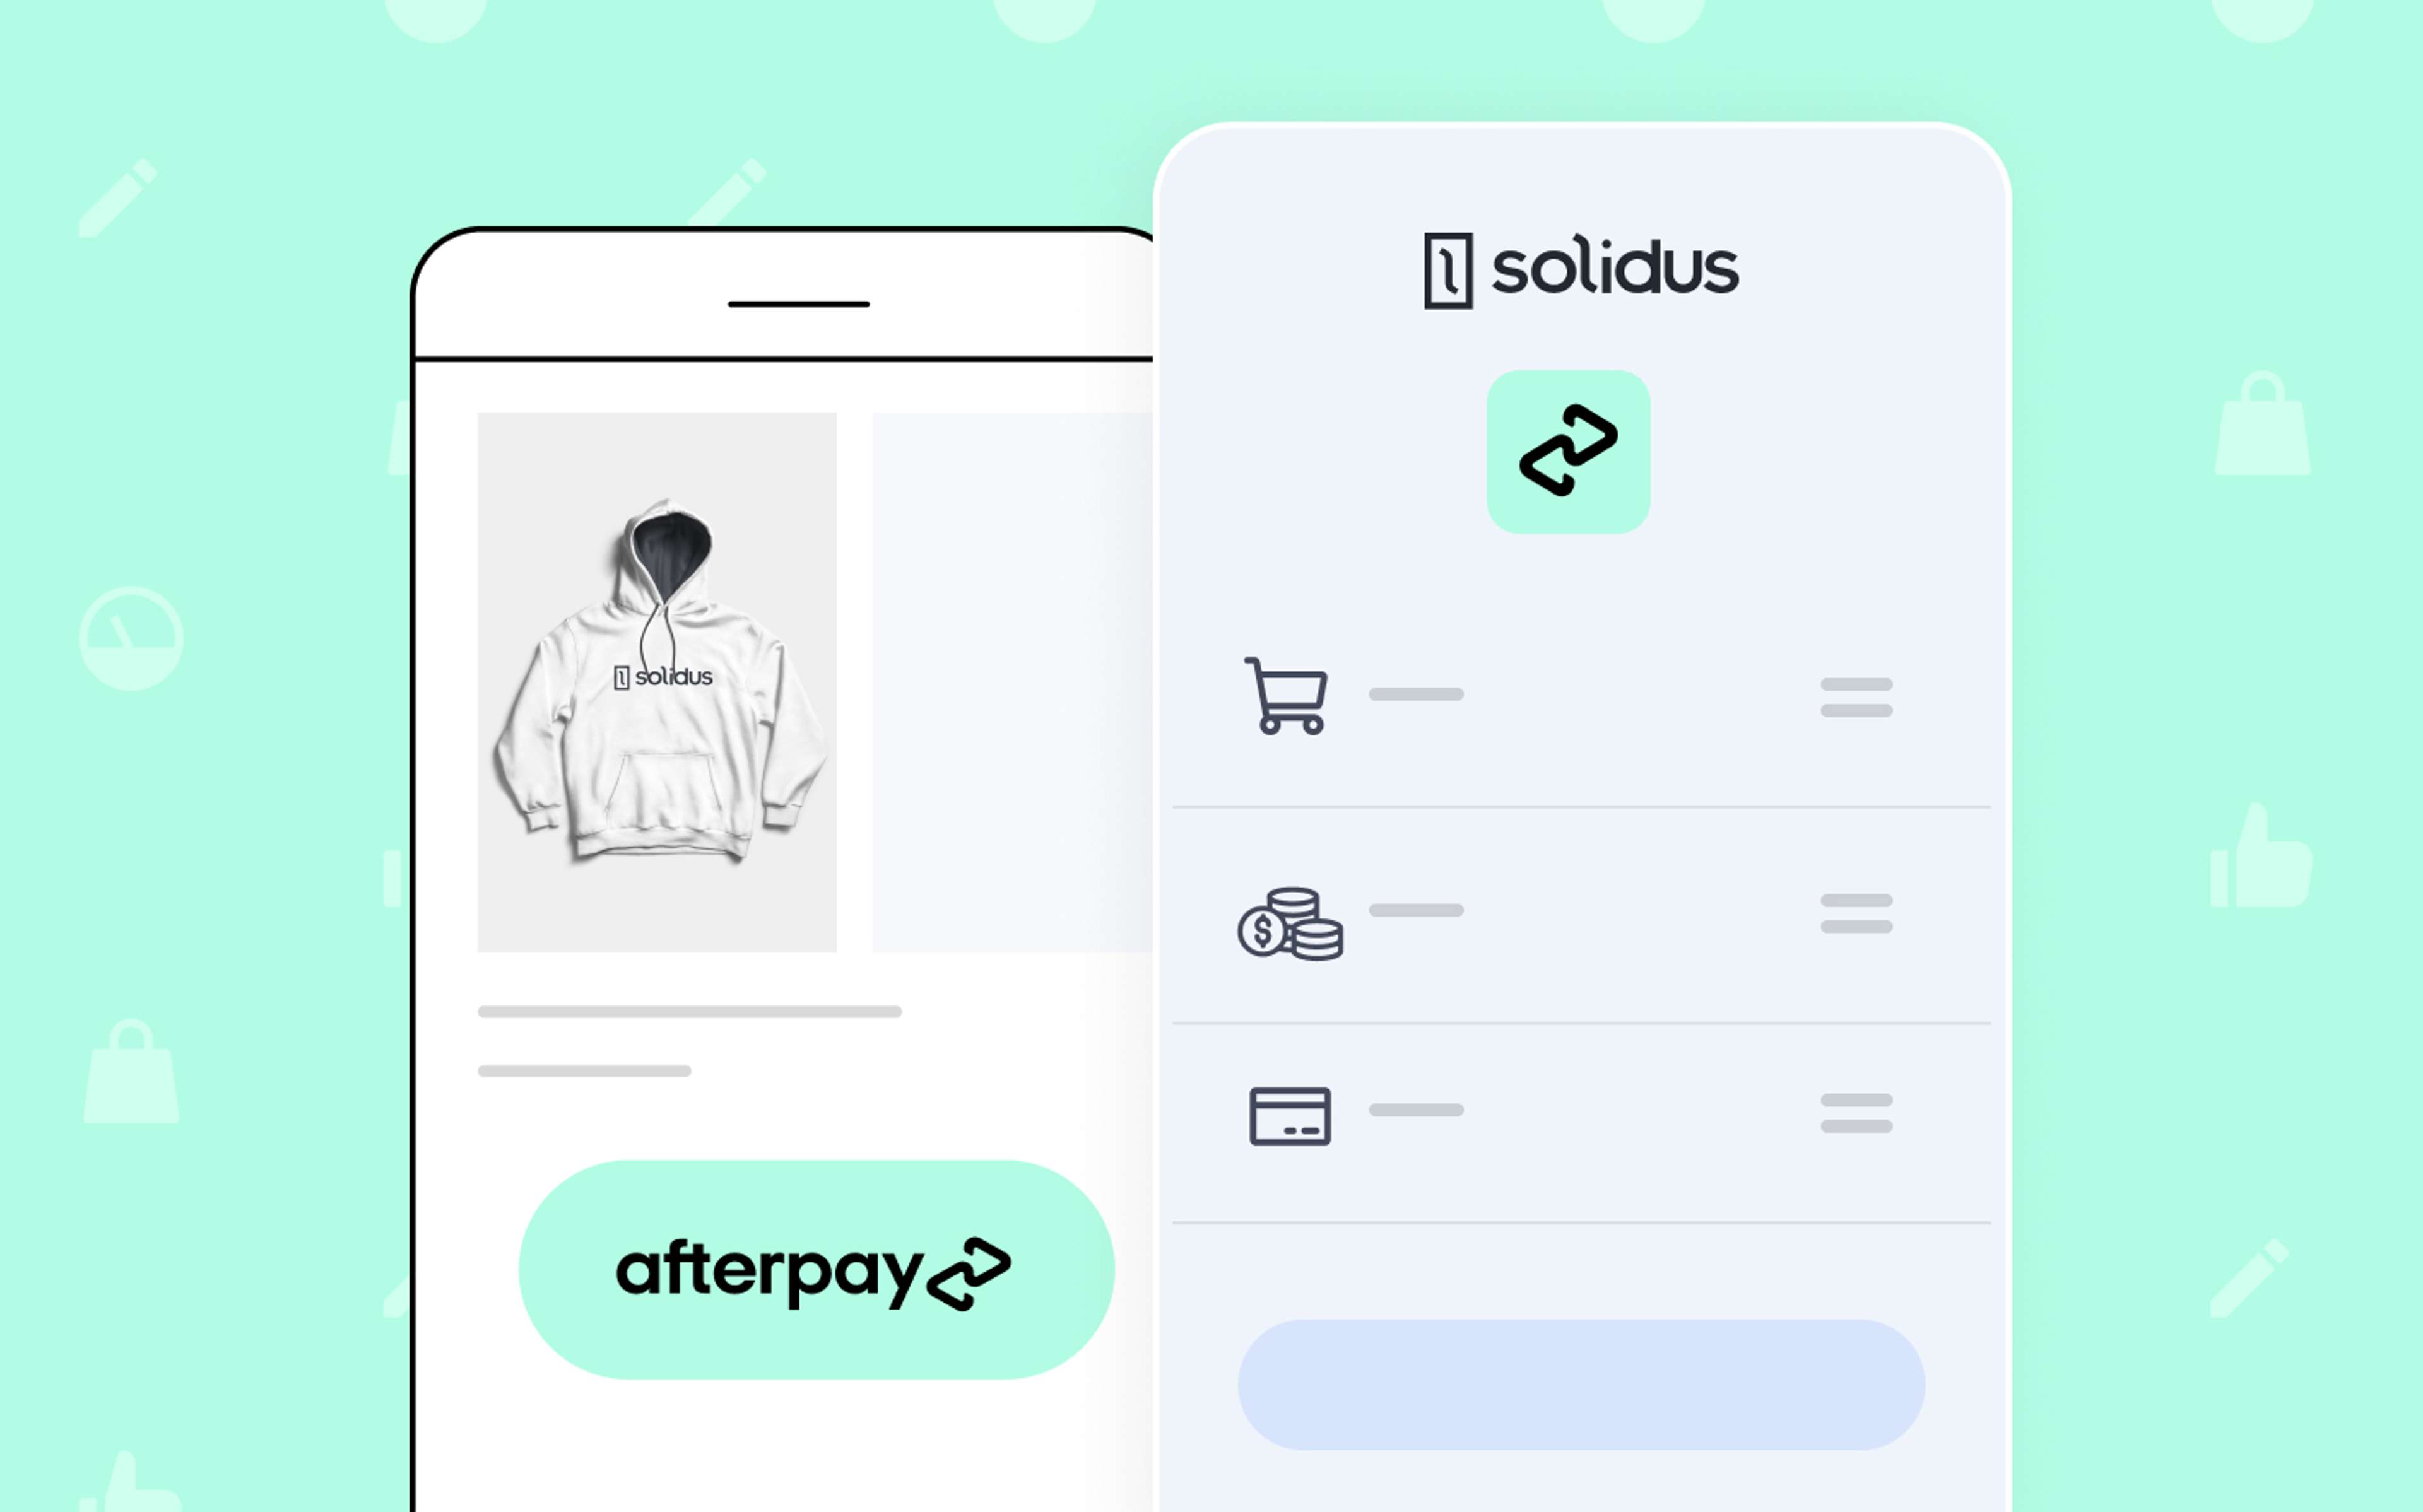 Using Afterpay with Solidus